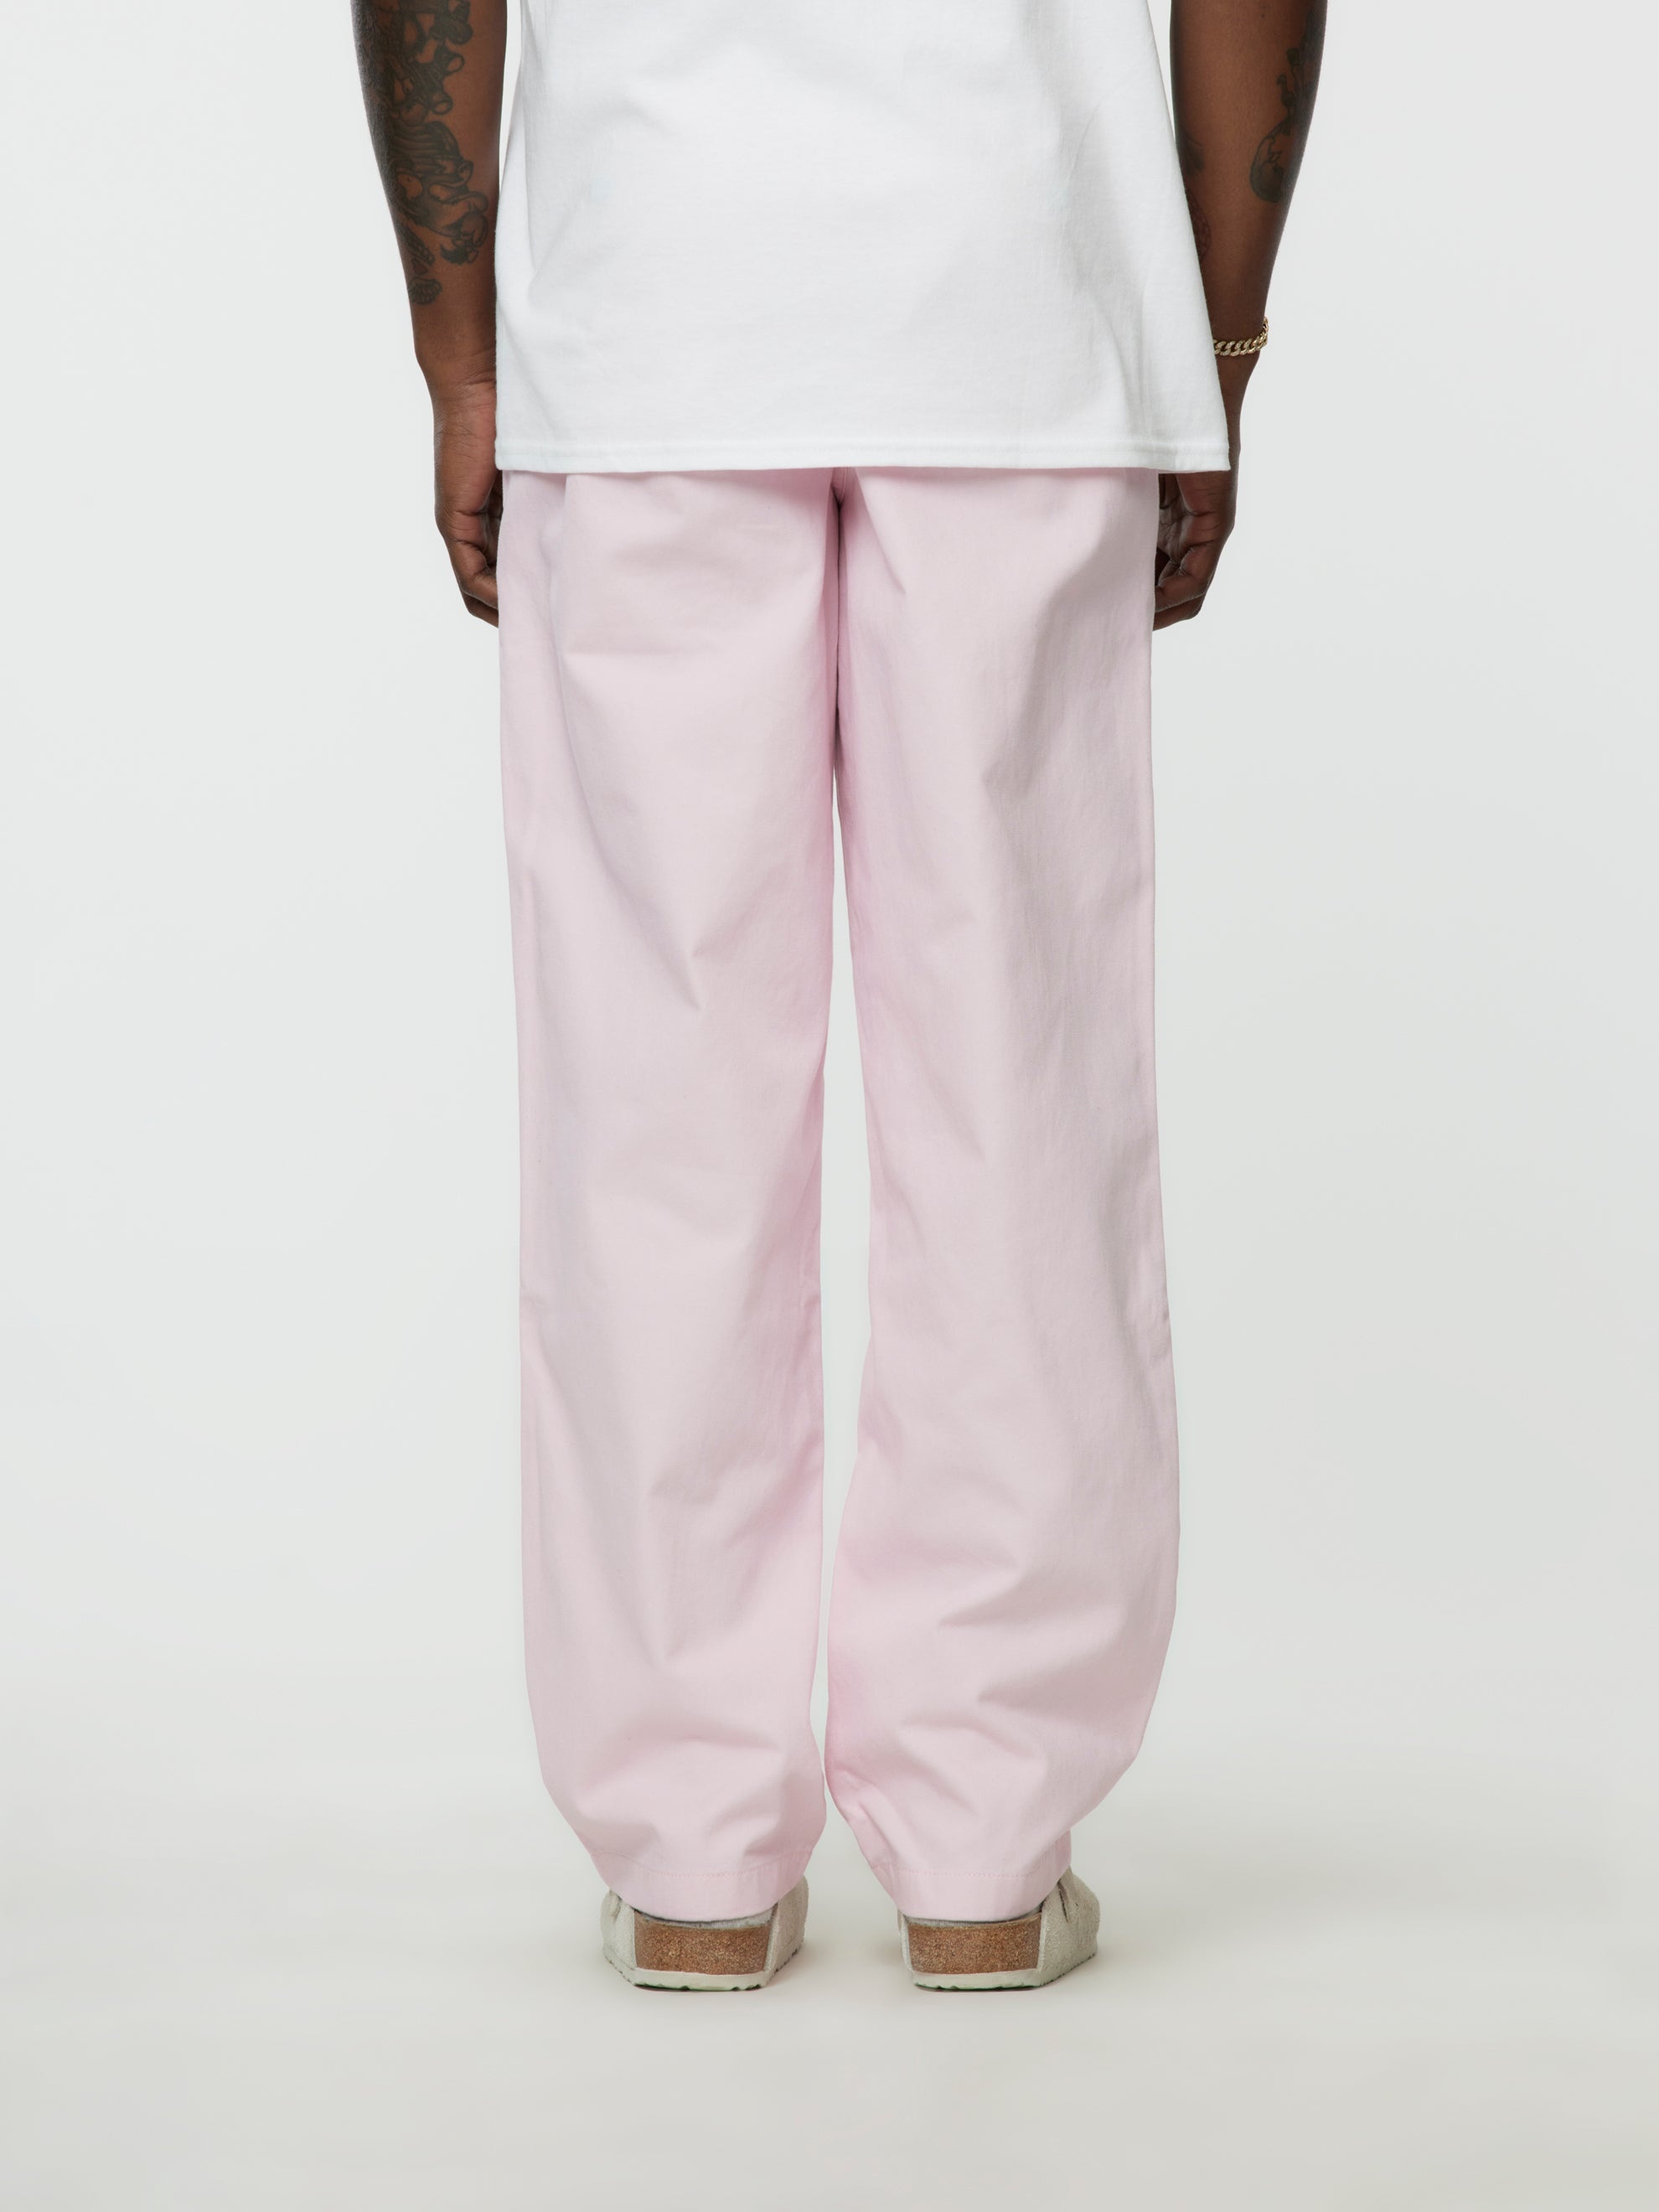 TWILL DOUBLE-PLEAT PANTS (PINK) - 5